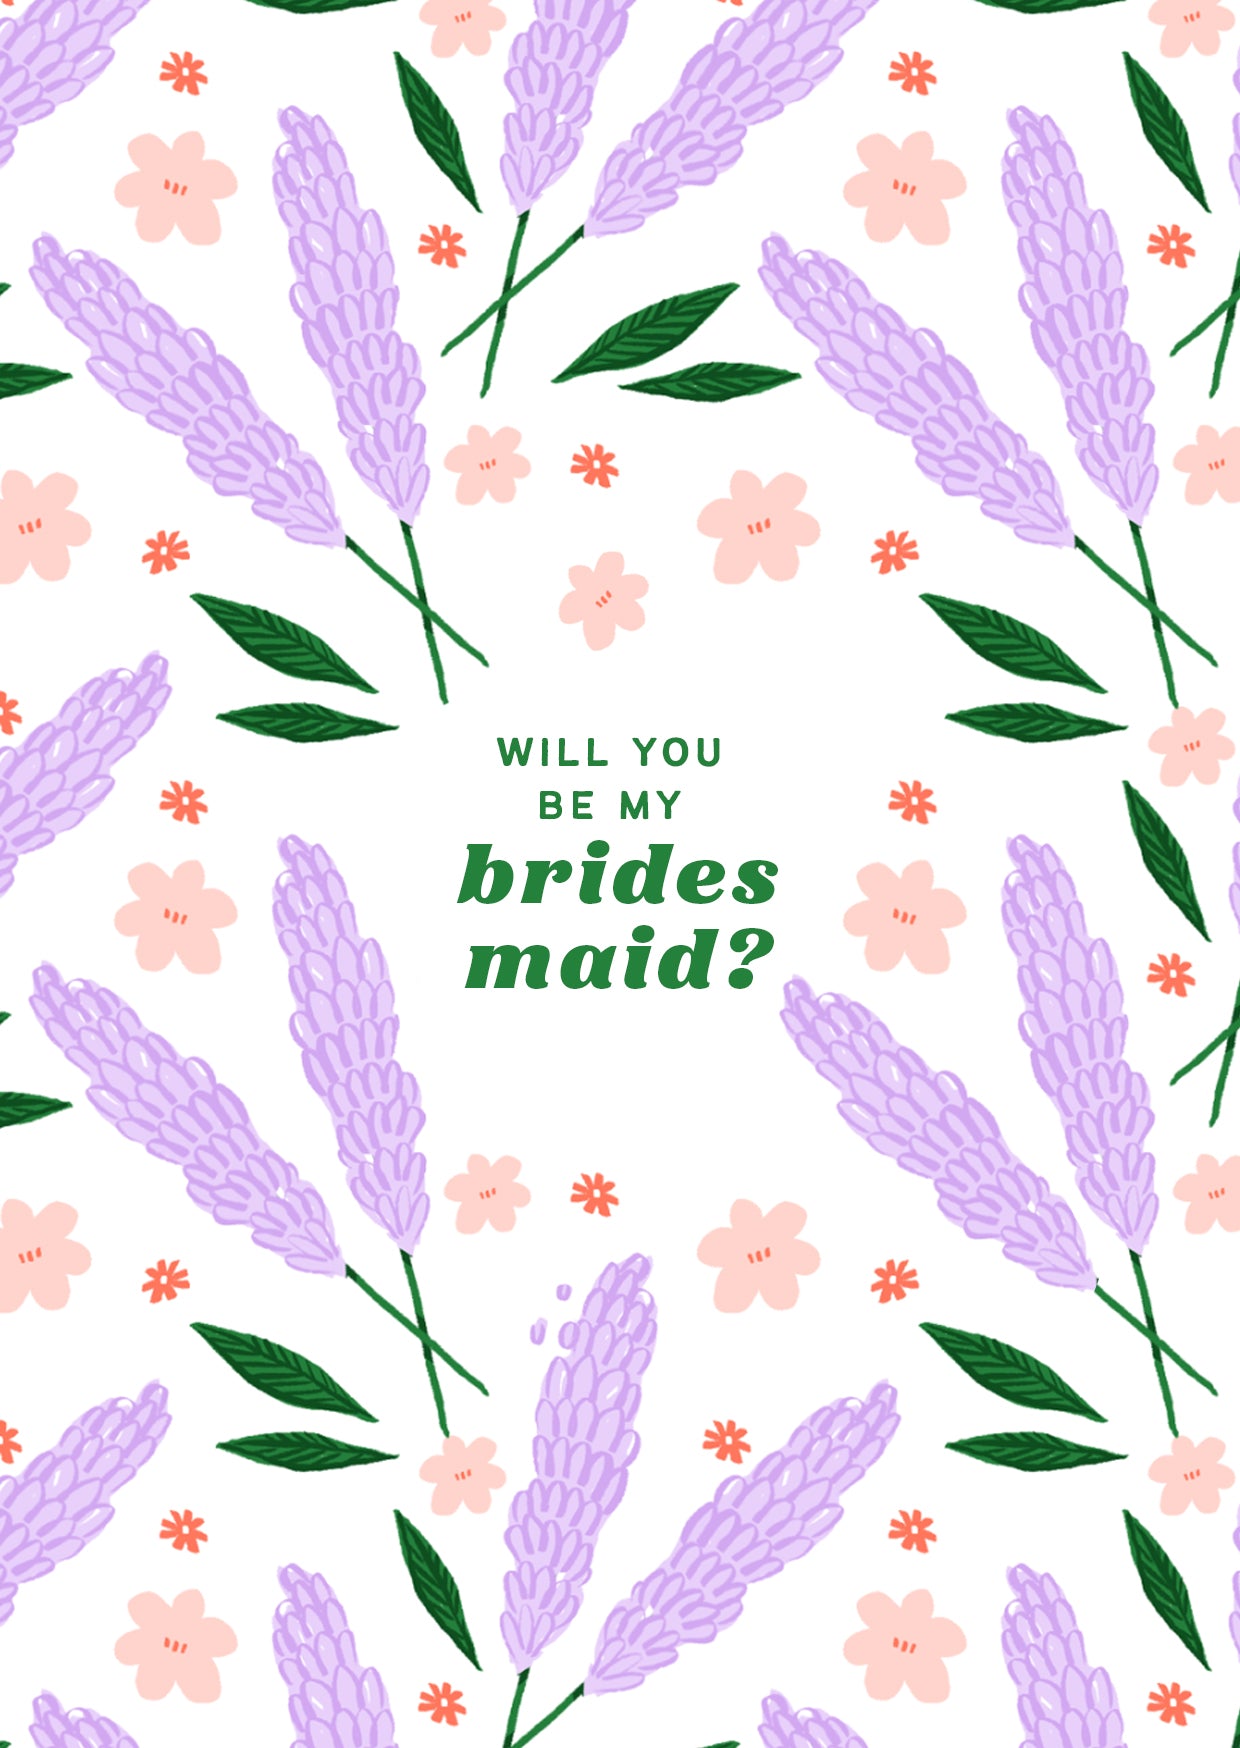 Will you be my Bridesmaid? - Lavender